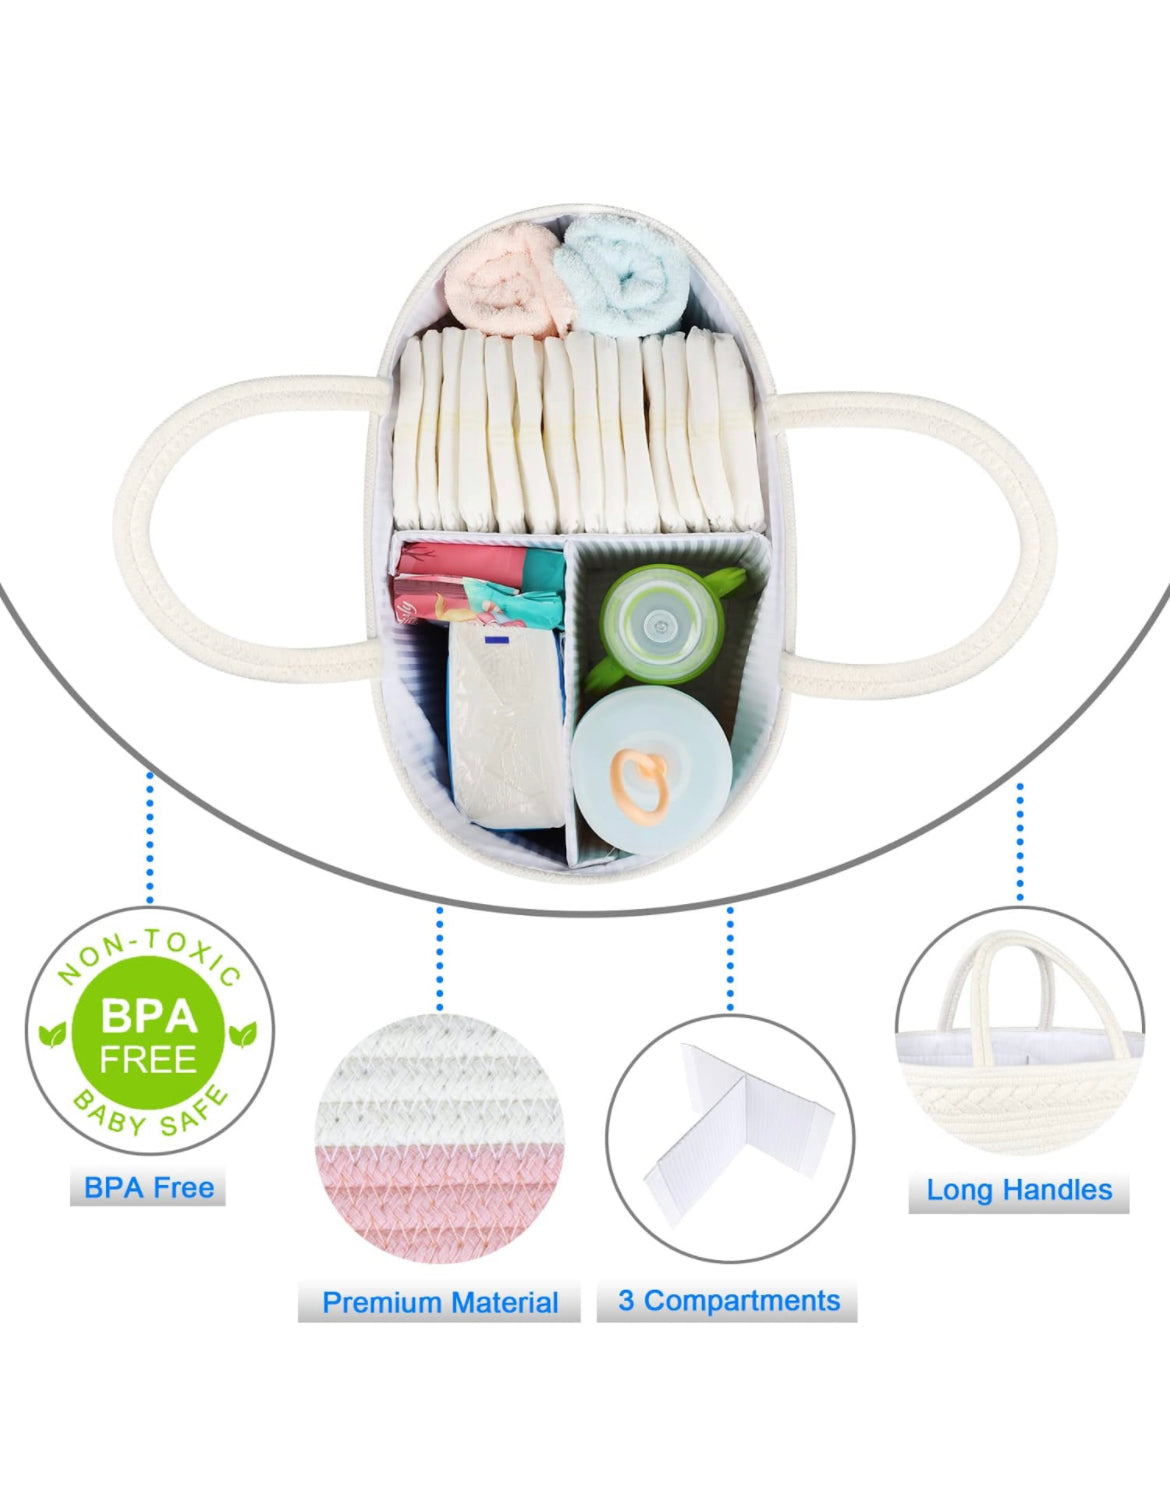 Diaper Caddy Organizer for Baby- pink.